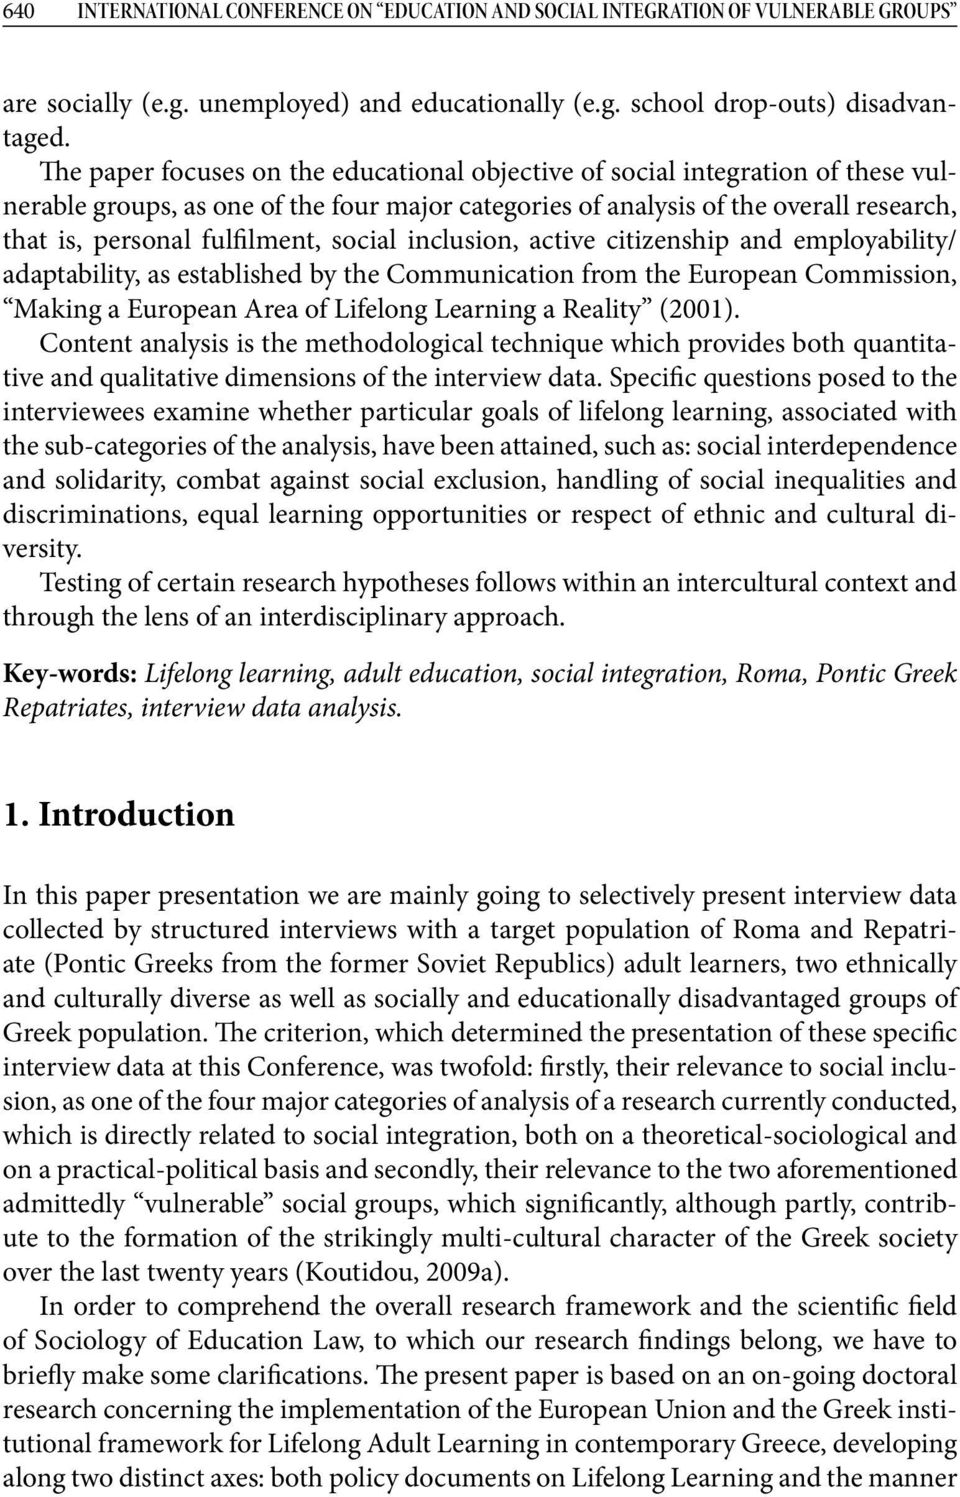 social inclusion, active citizenship and employability/ adaptability, as established by the Communication from the European Commission, Making a European Area of Lifelong Learning a Reality (2001).